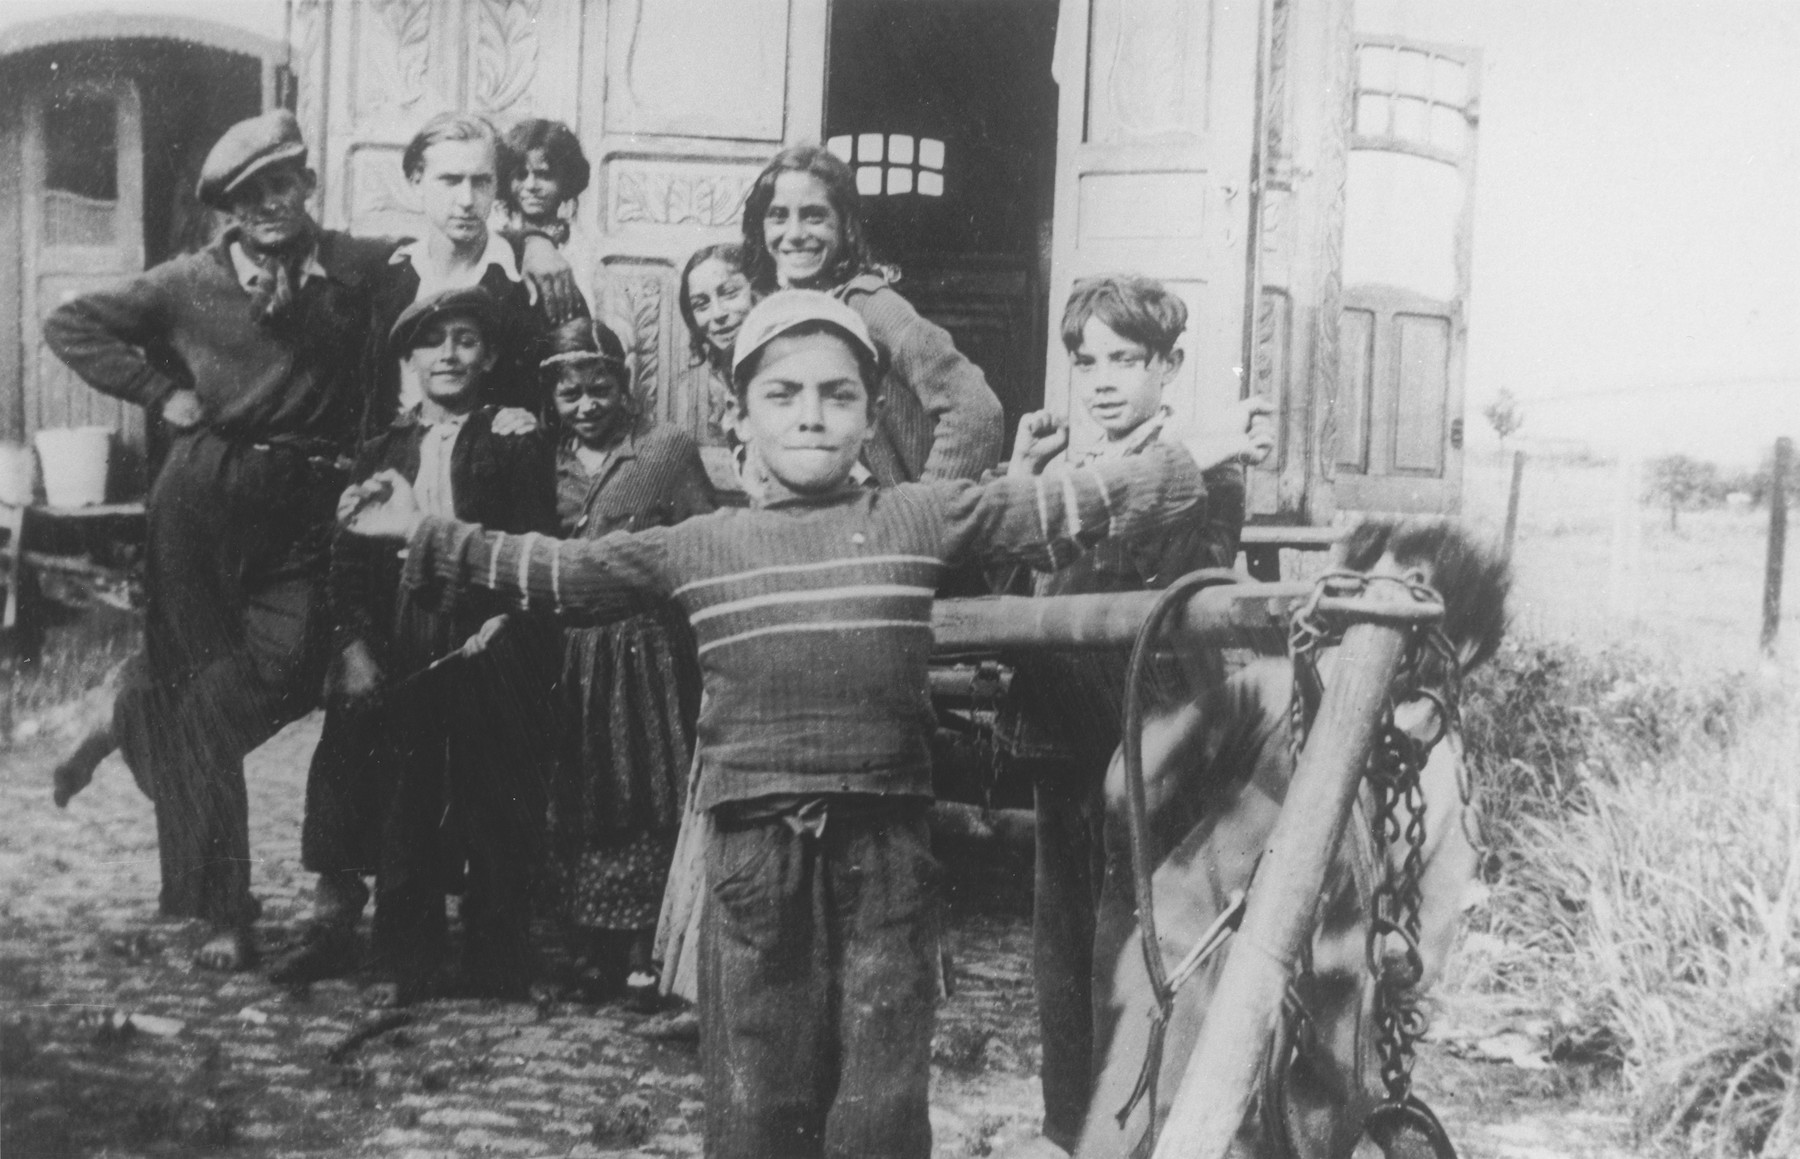 A Romani child poses in front of a caravan with his arms outstretched, while his family looks on.

Pictured in the back, second from the left, is Jan Yoors.